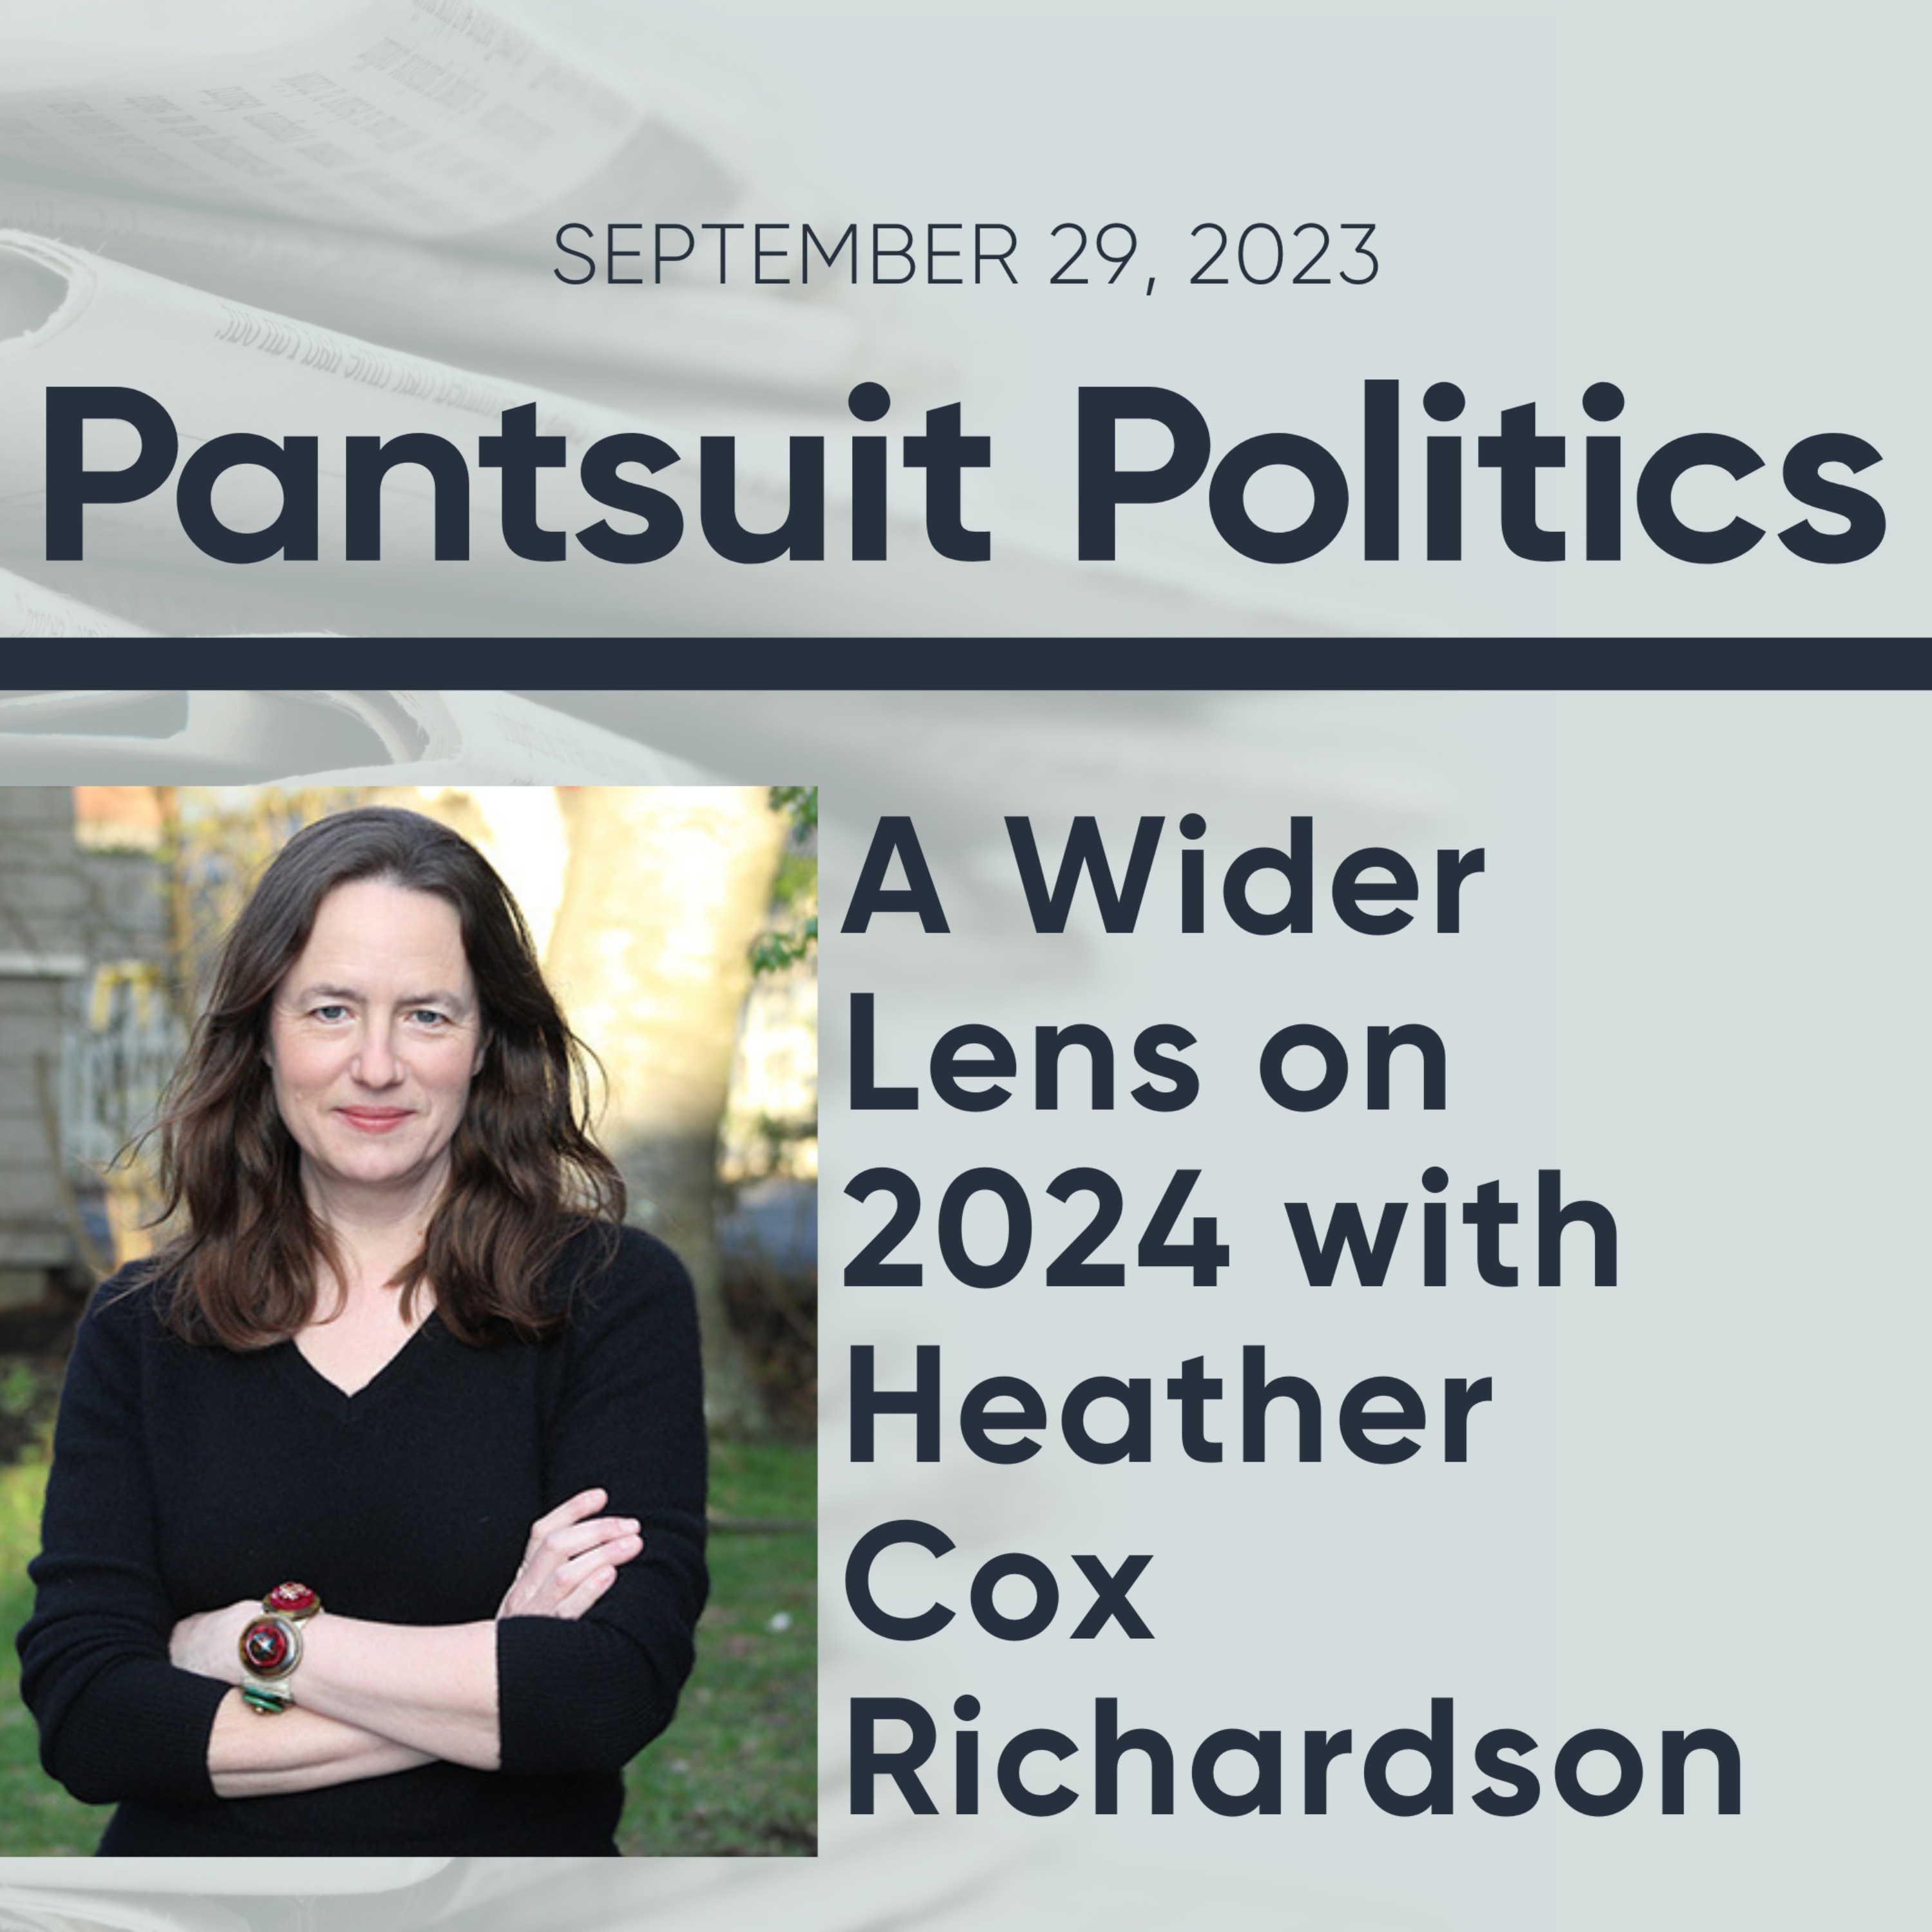 A Wider Lens on 2024 with Heather Cox Richardson